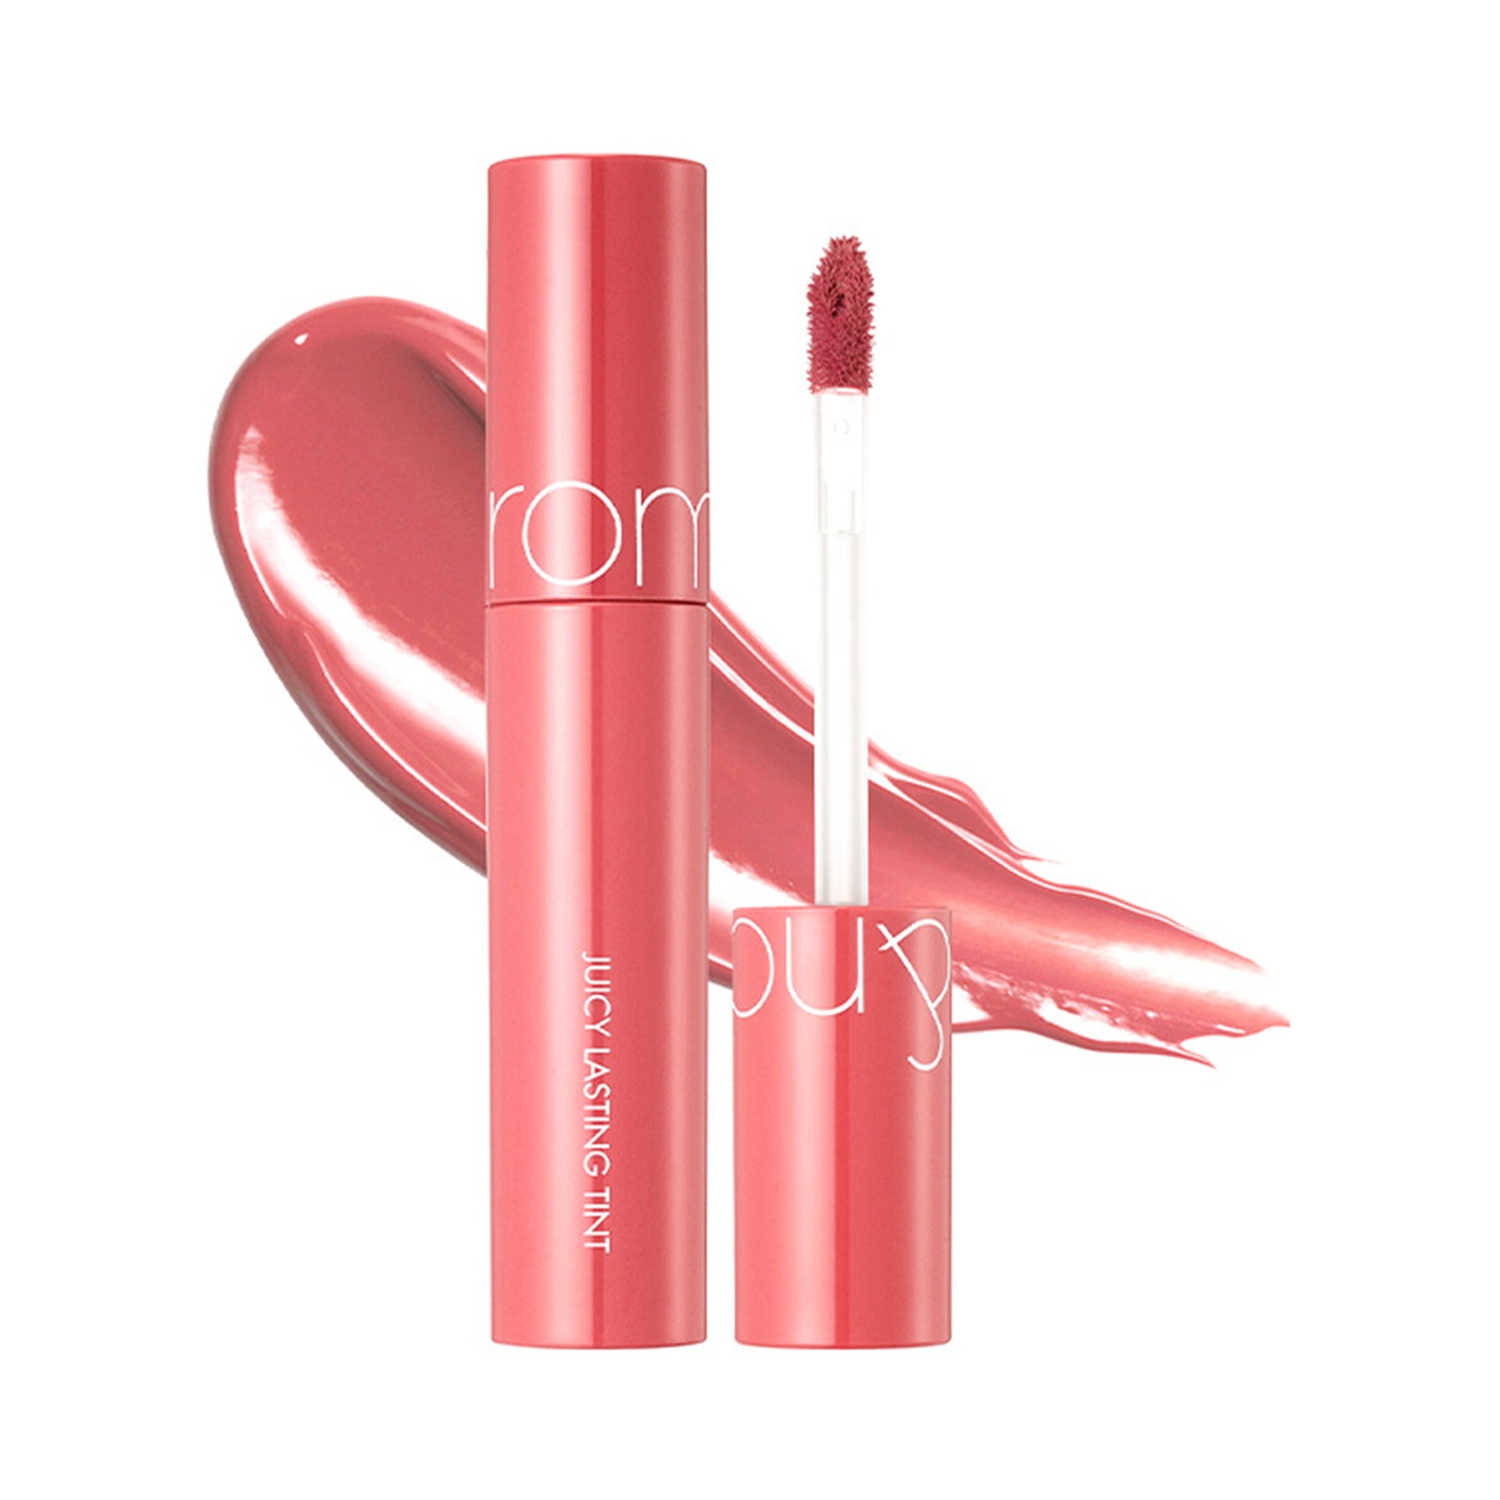 Rom&nd | Rom&nd Juicy Lasting Tint - 09 Litchi Coral (5.5g)